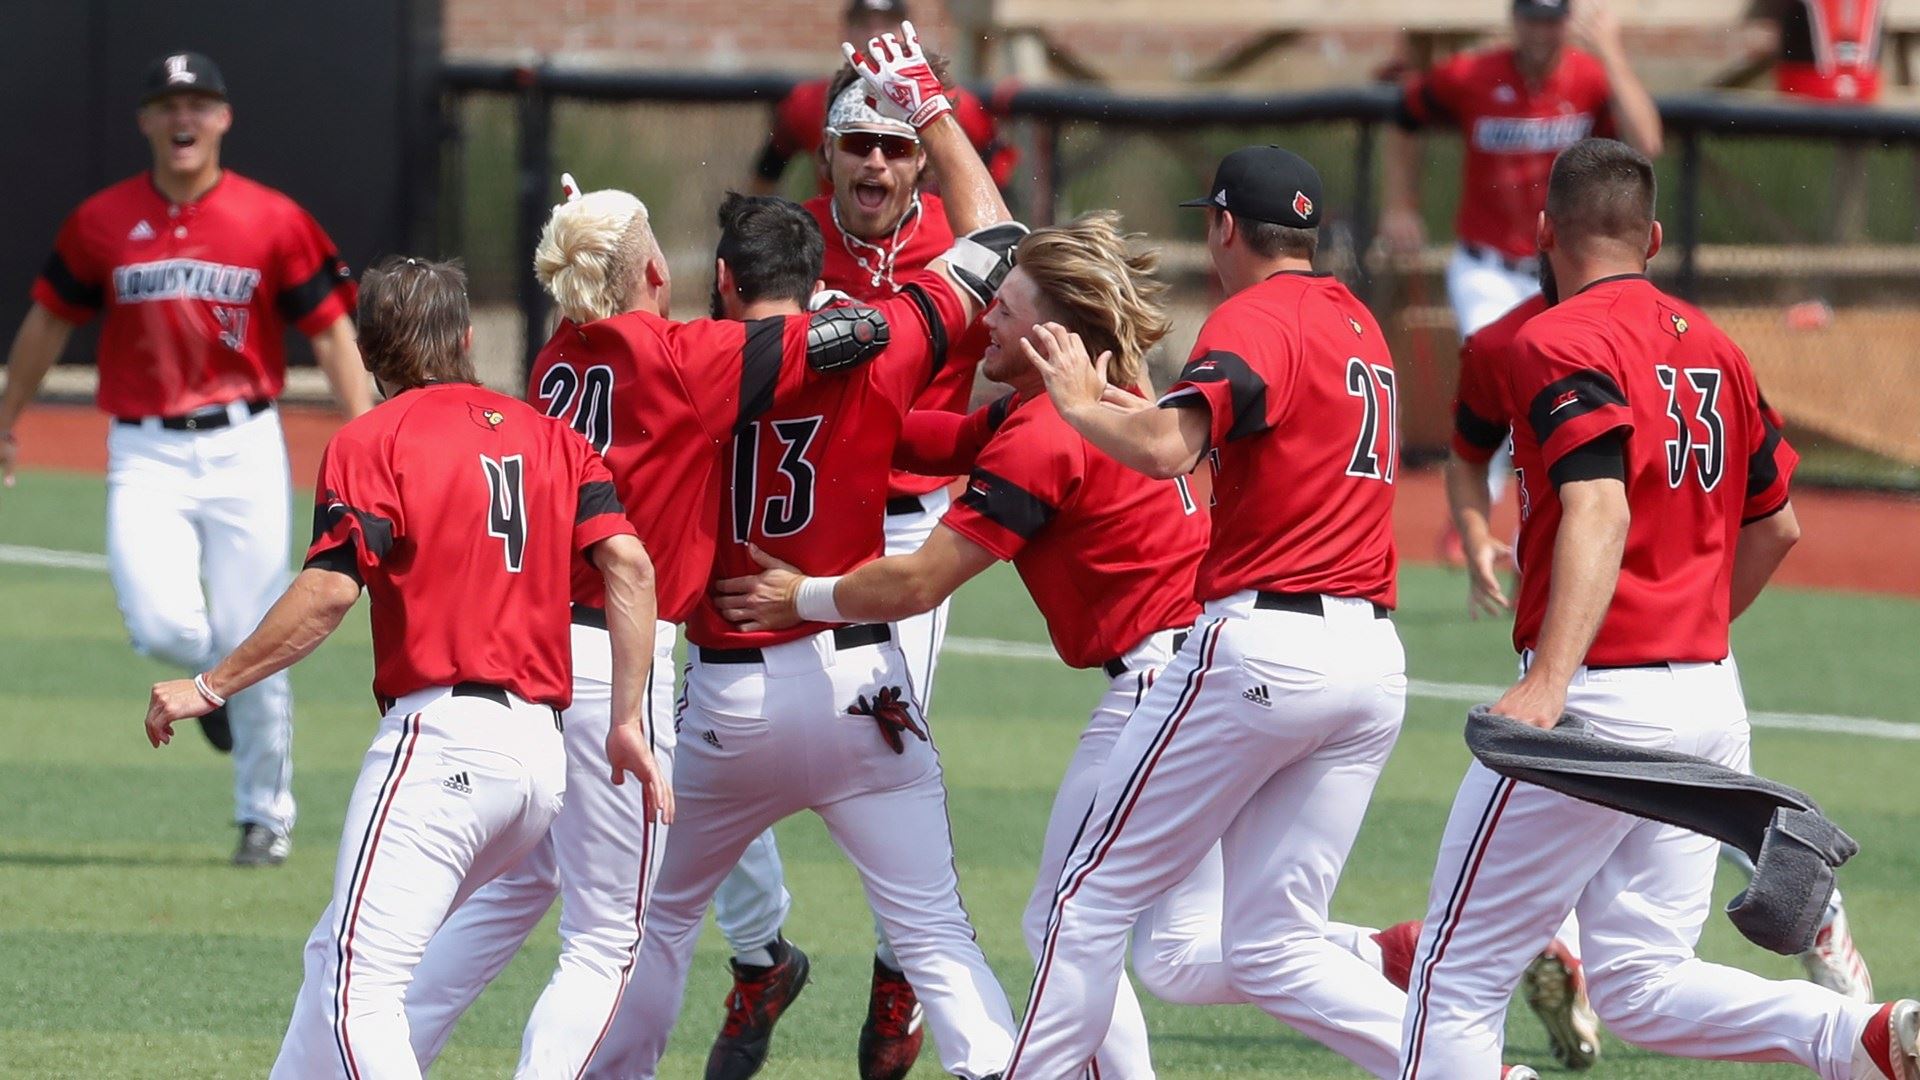 Louisville will play in the Super Regional round for the sixth time in seven seasons.